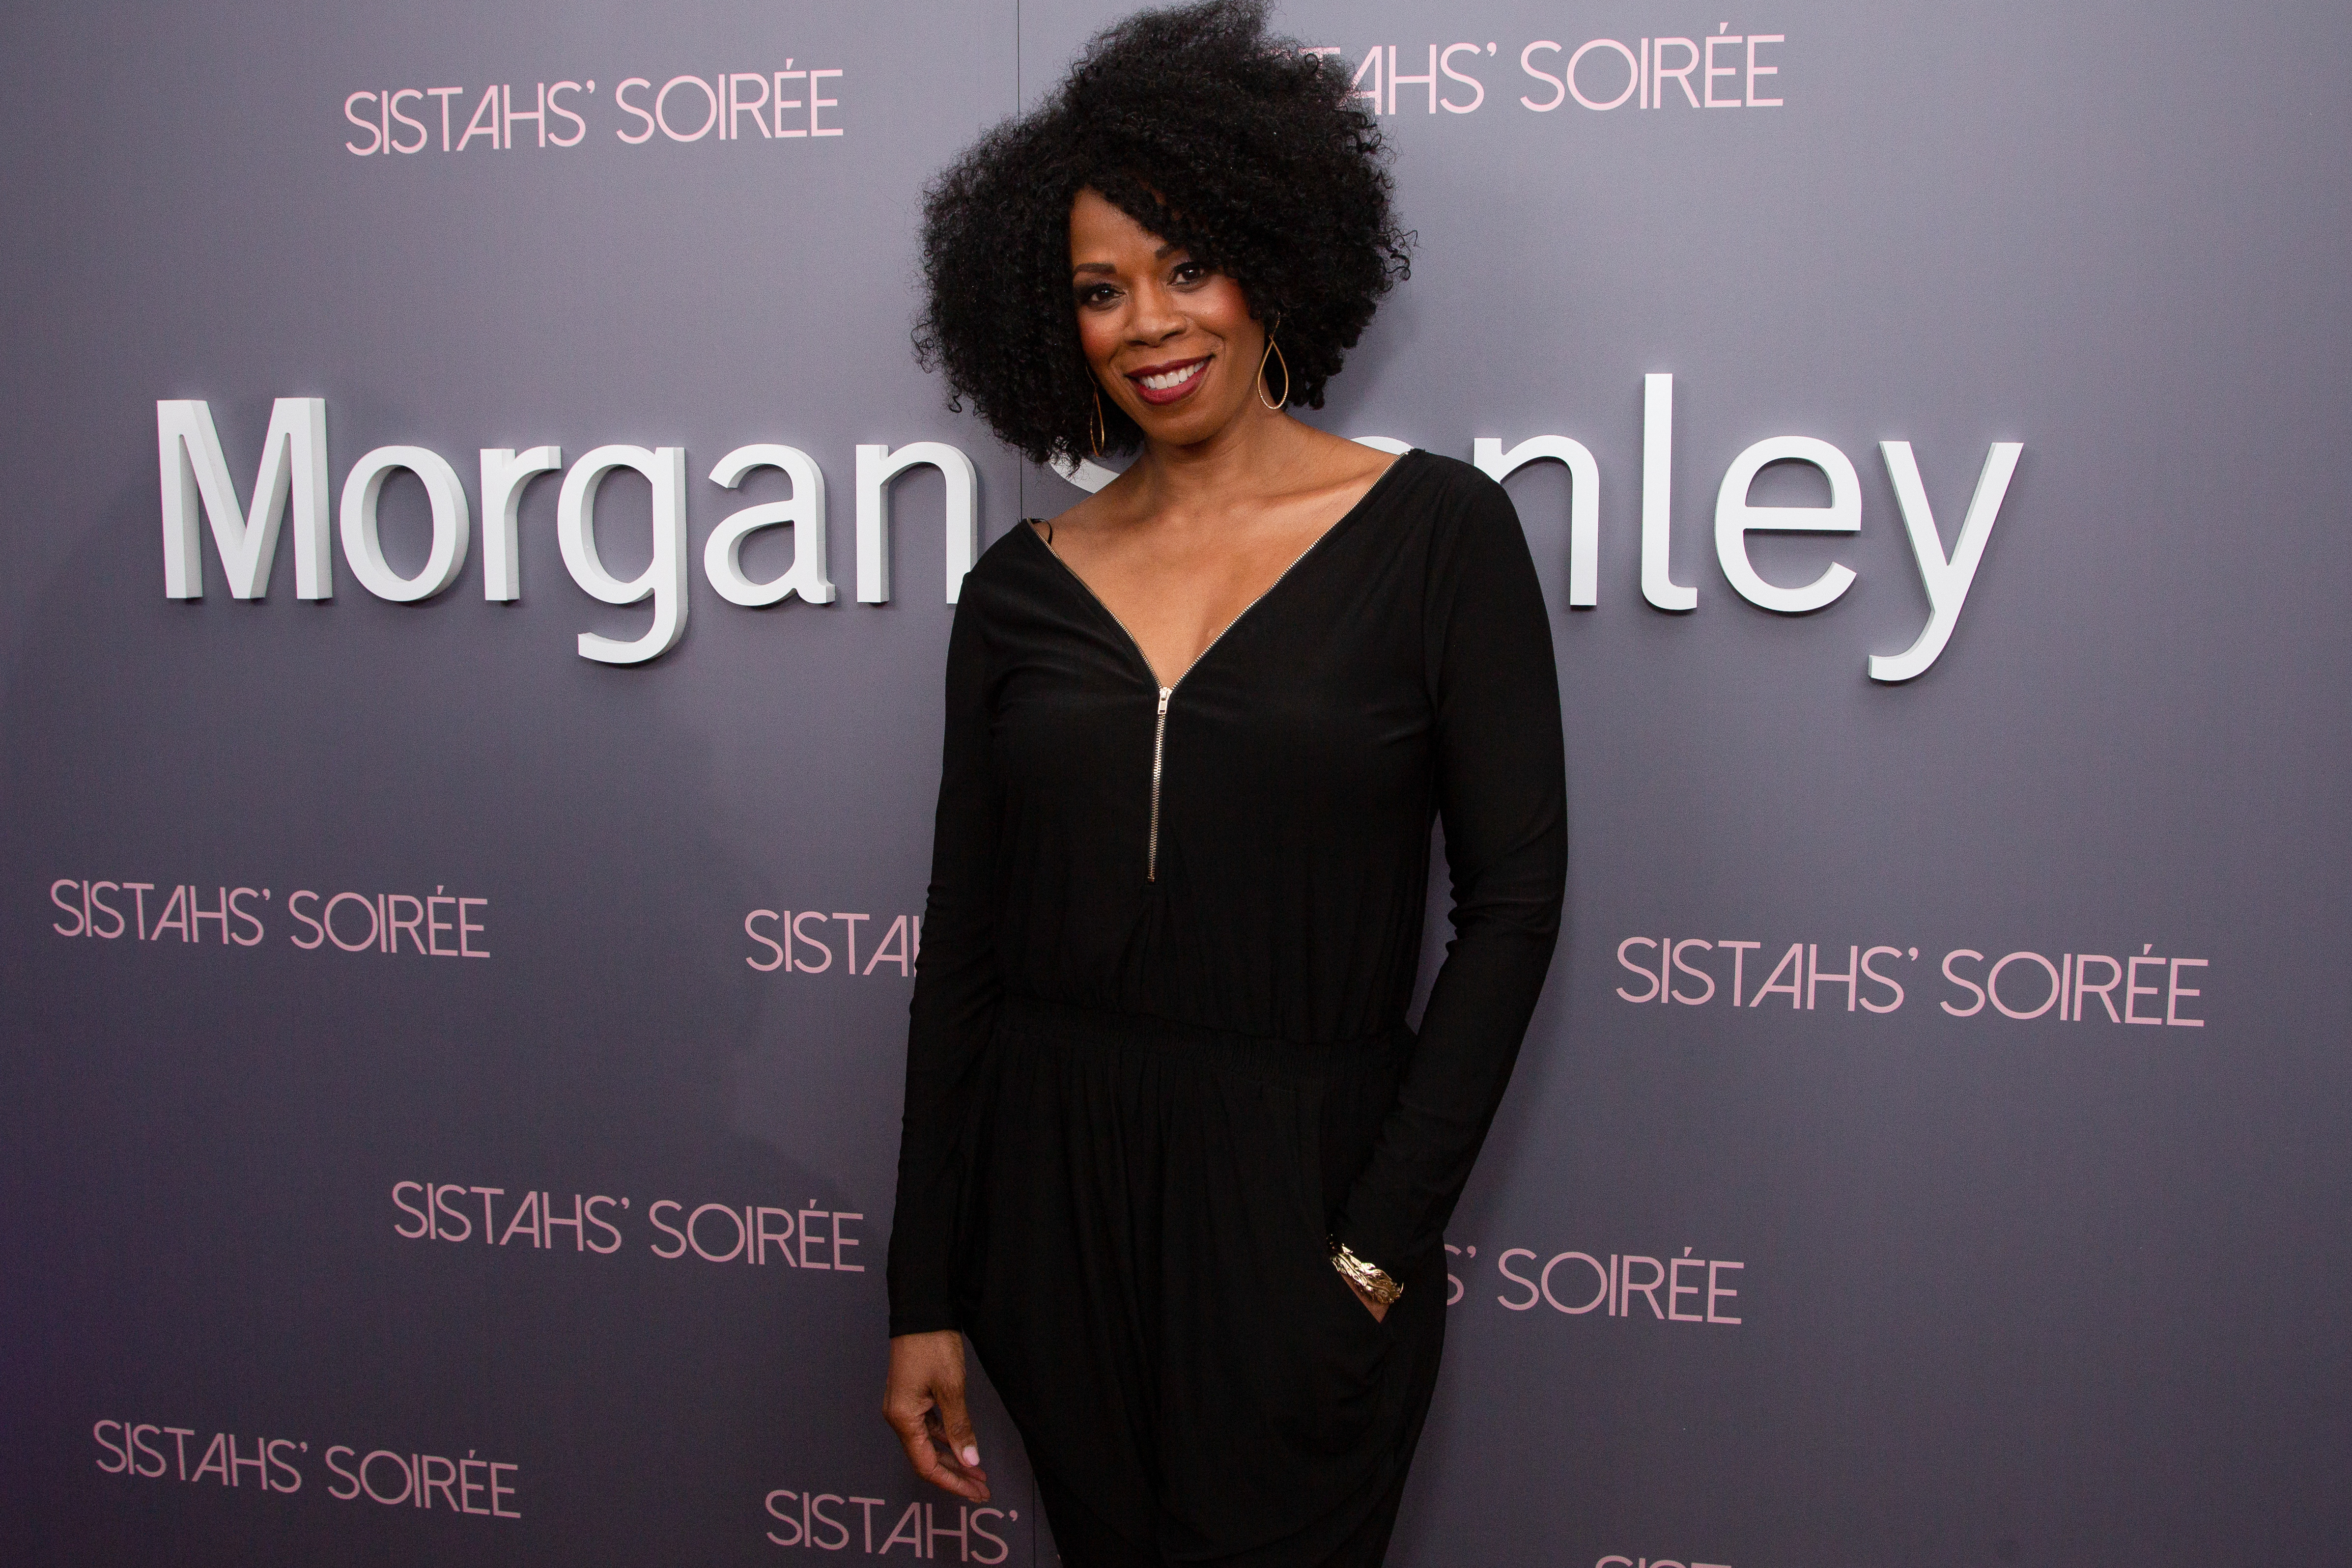 Kim Wayans arrives for the 10th Annual Sistahs' Soiree on February 20, 2019, in Los Angeles, California. | Source: Getty Images